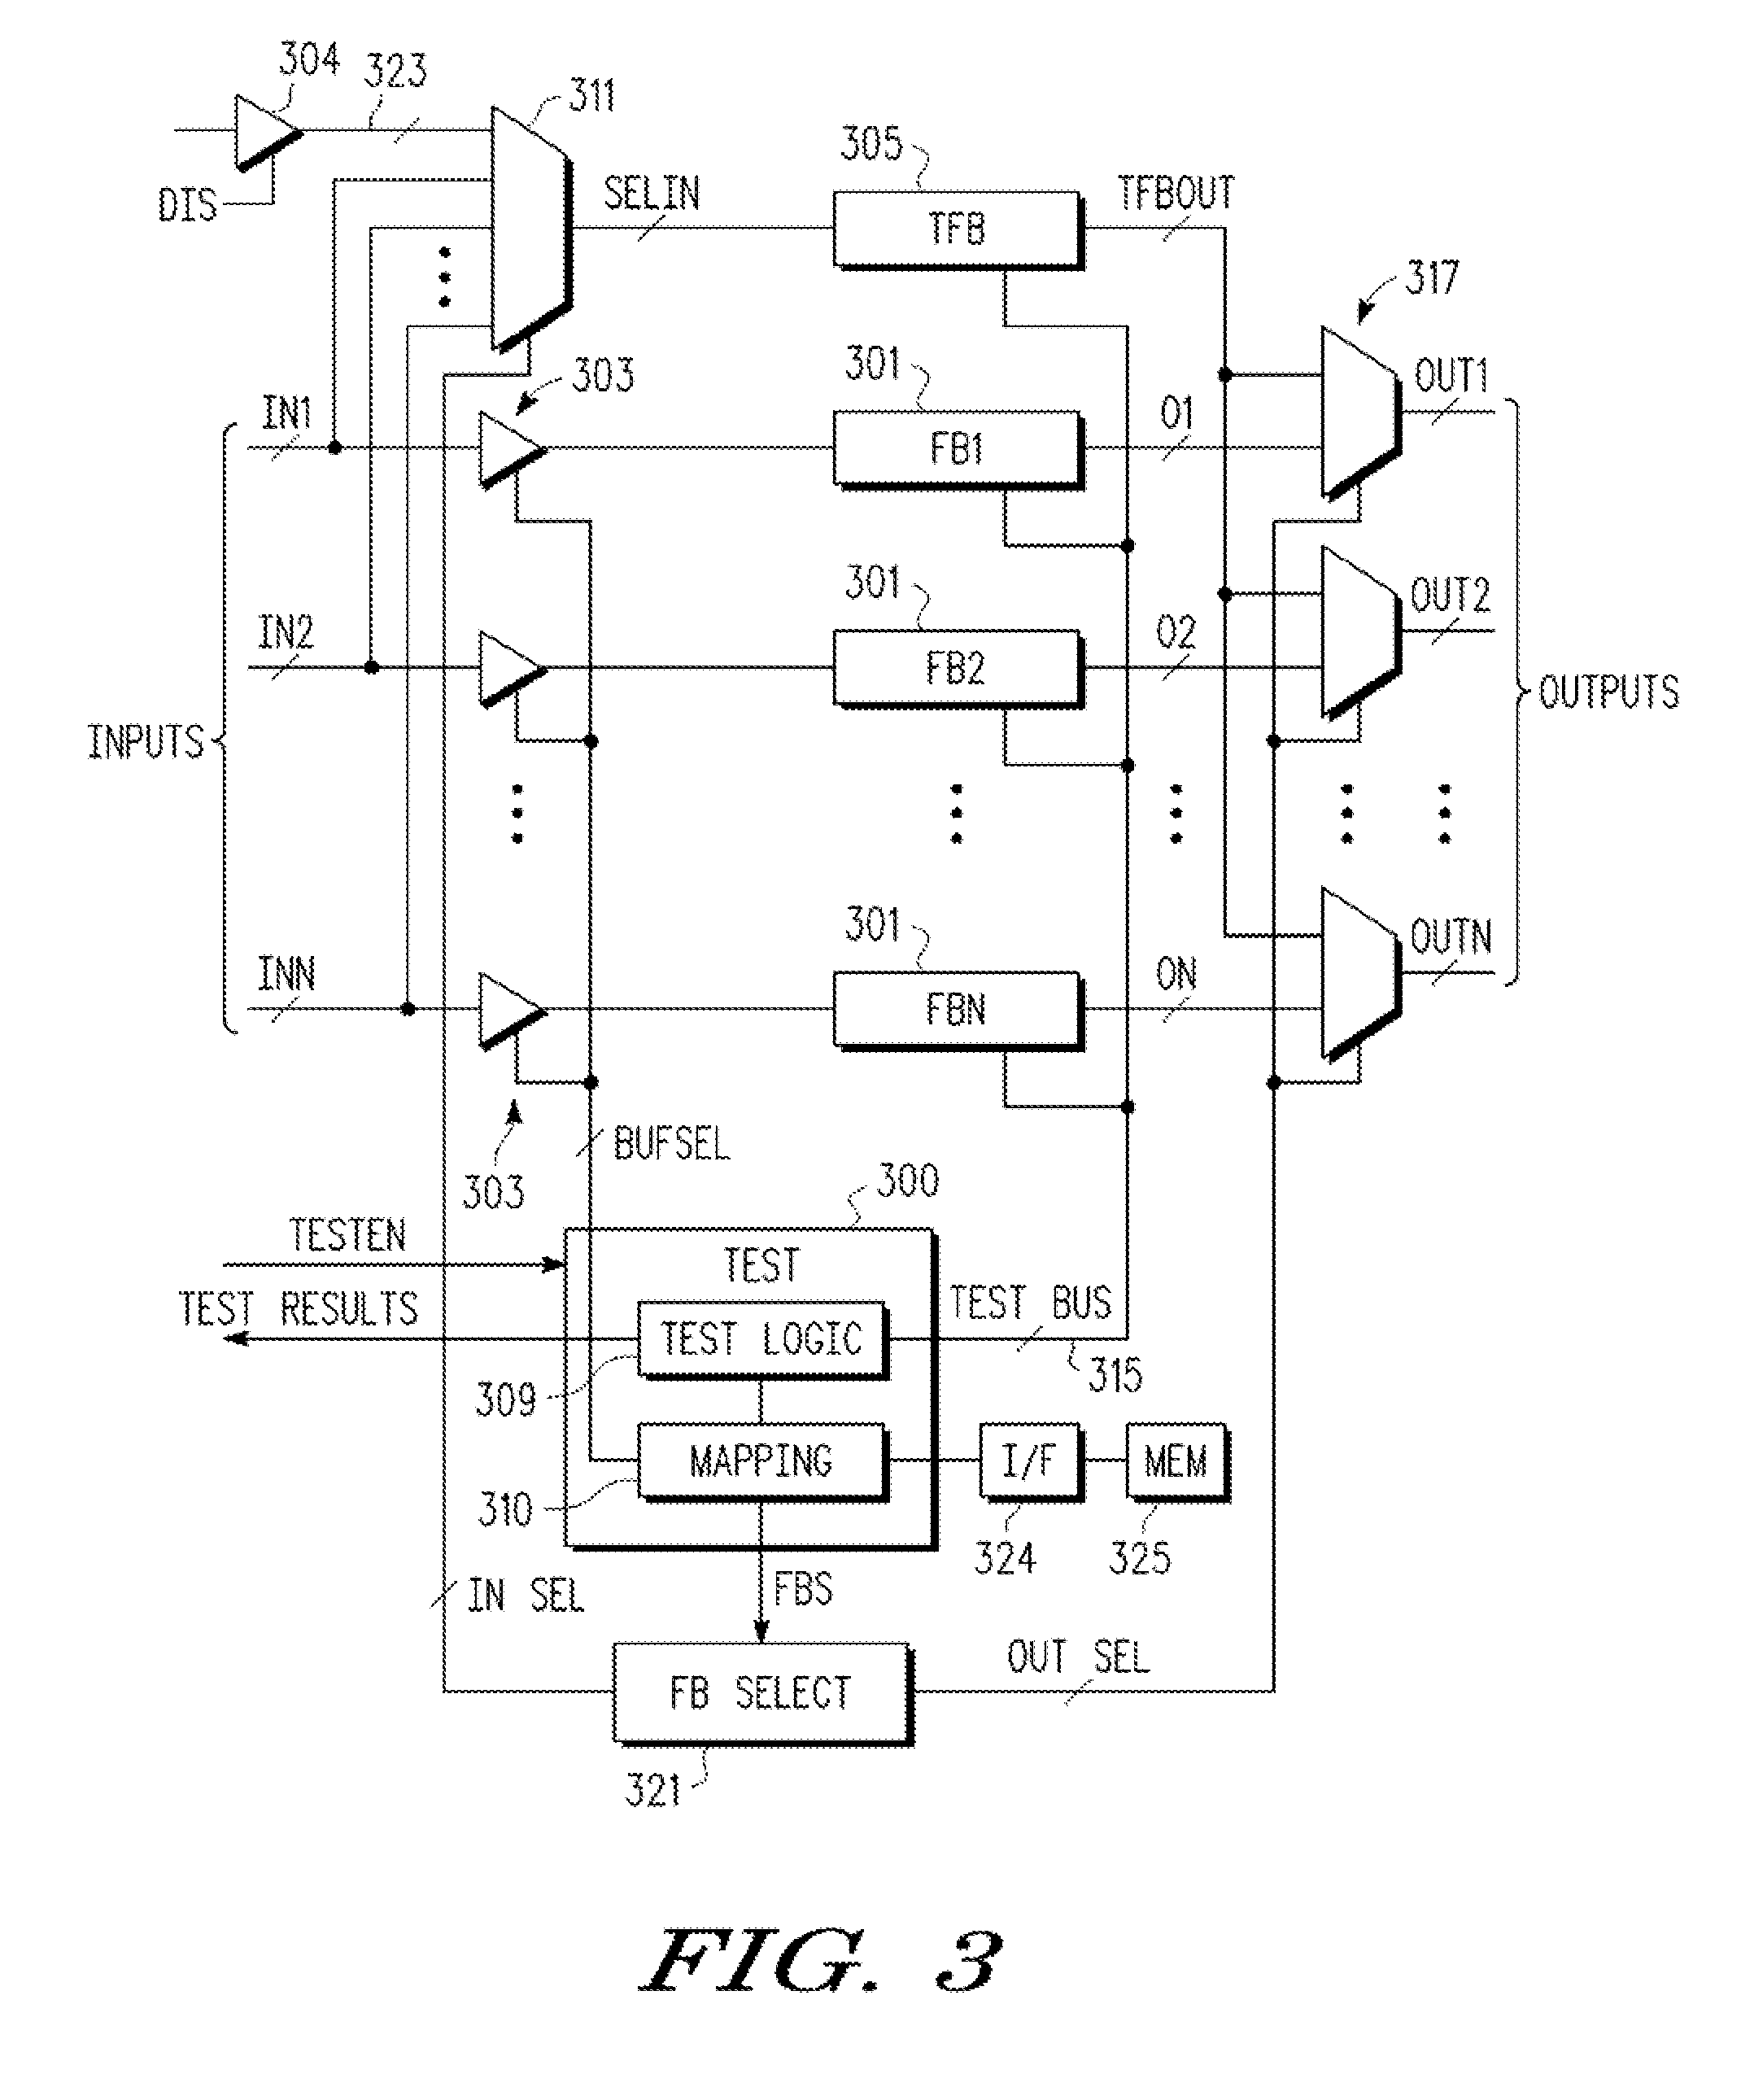 Integrated circuit with continuous testing of repetitive functional blocks